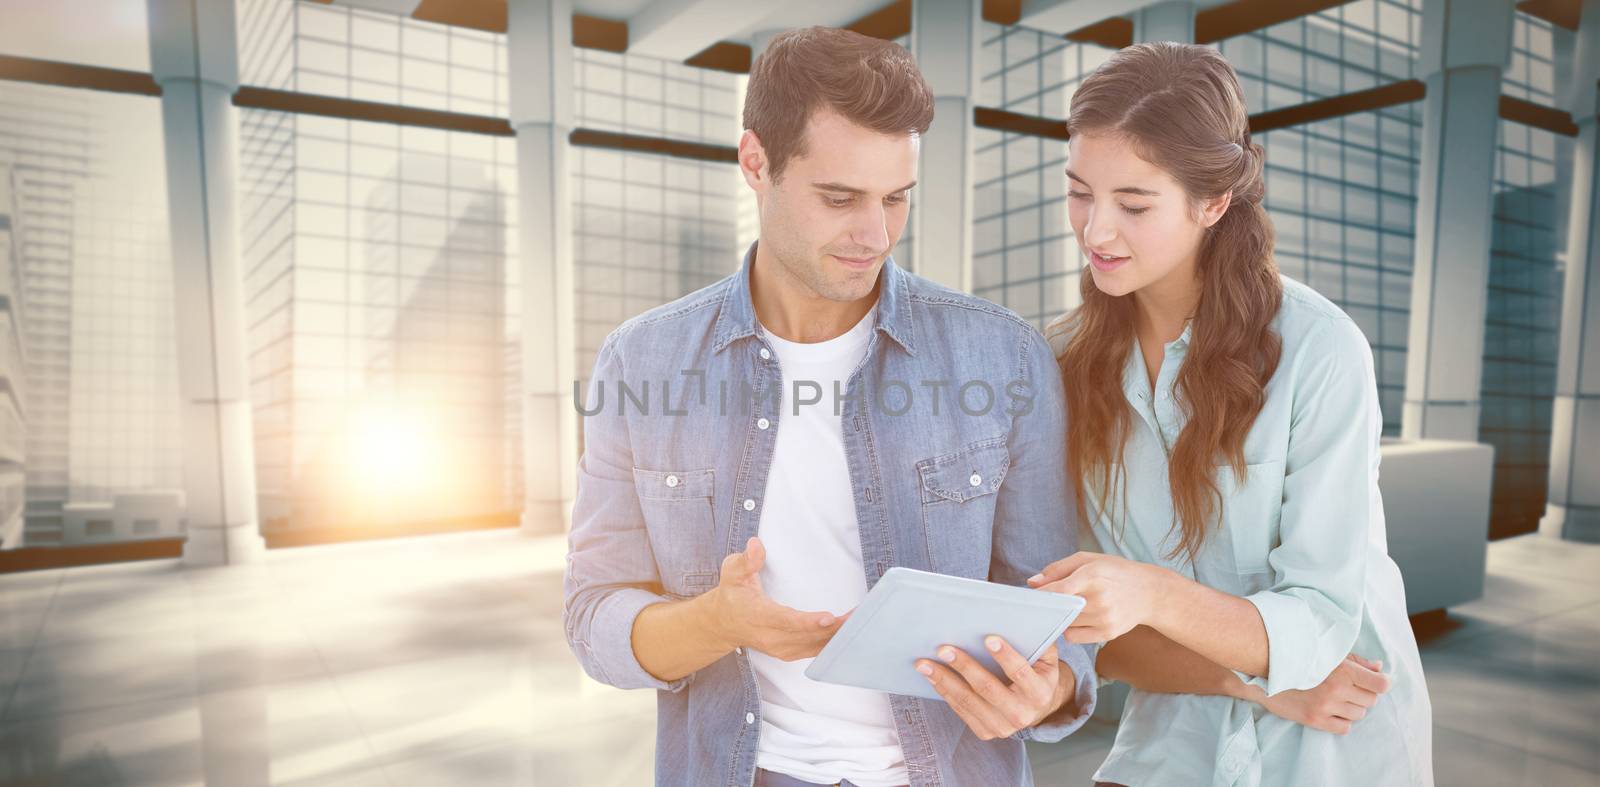 Business people with tablet against modern room overlooking city